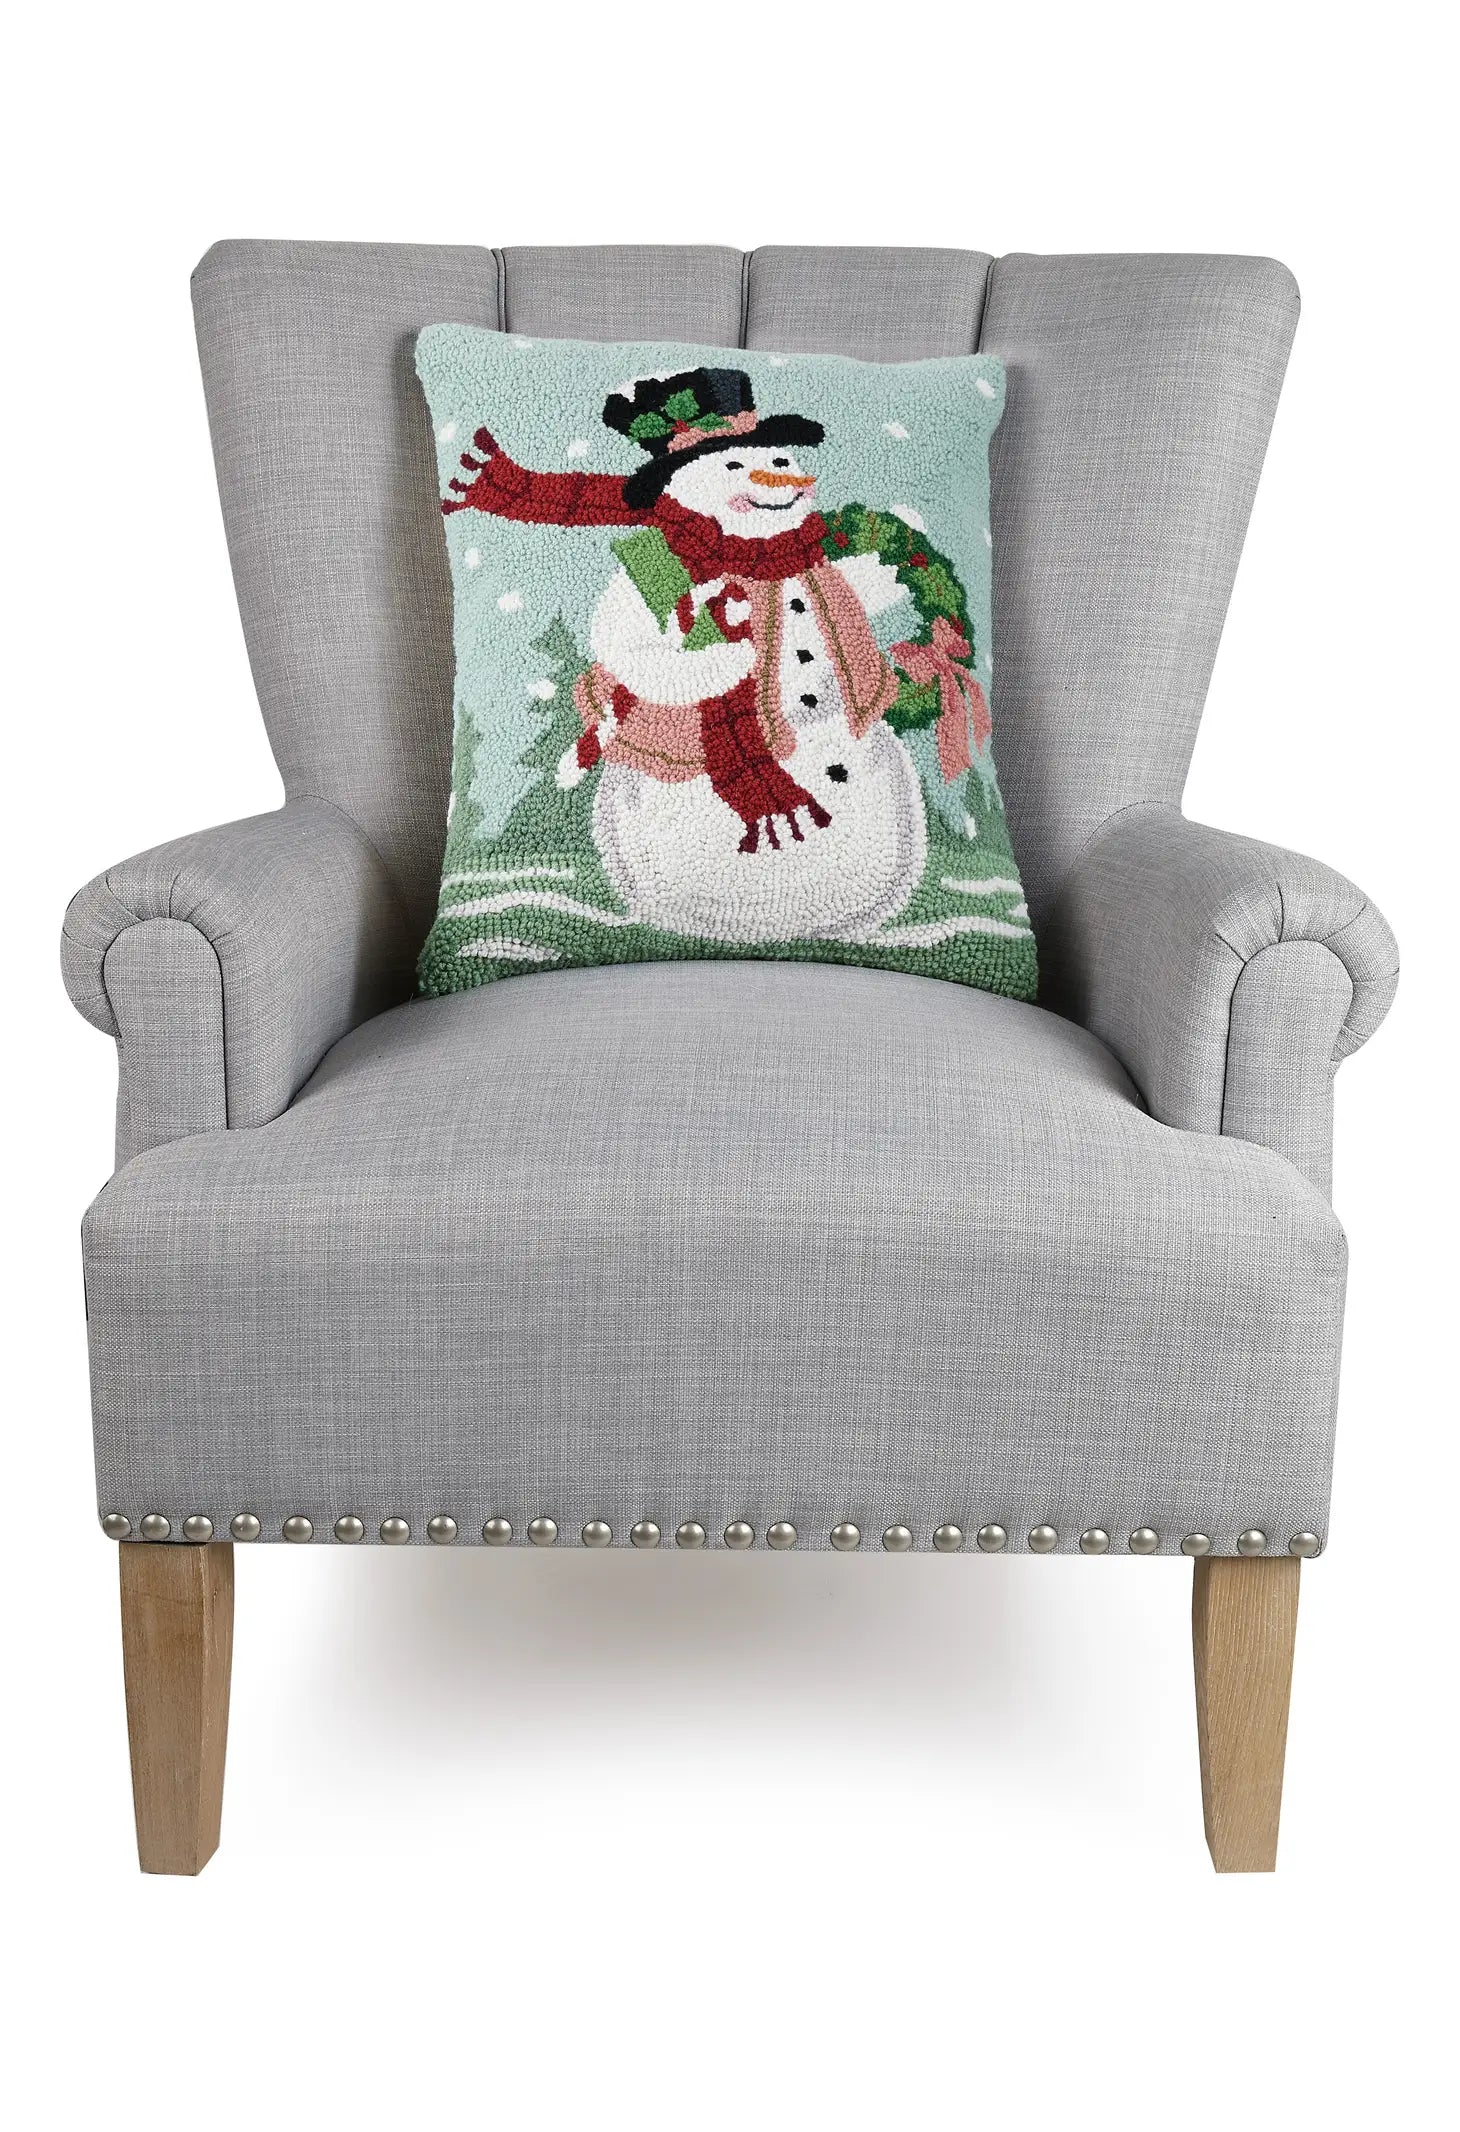 Pillow Snowman with Red Scarf Hook